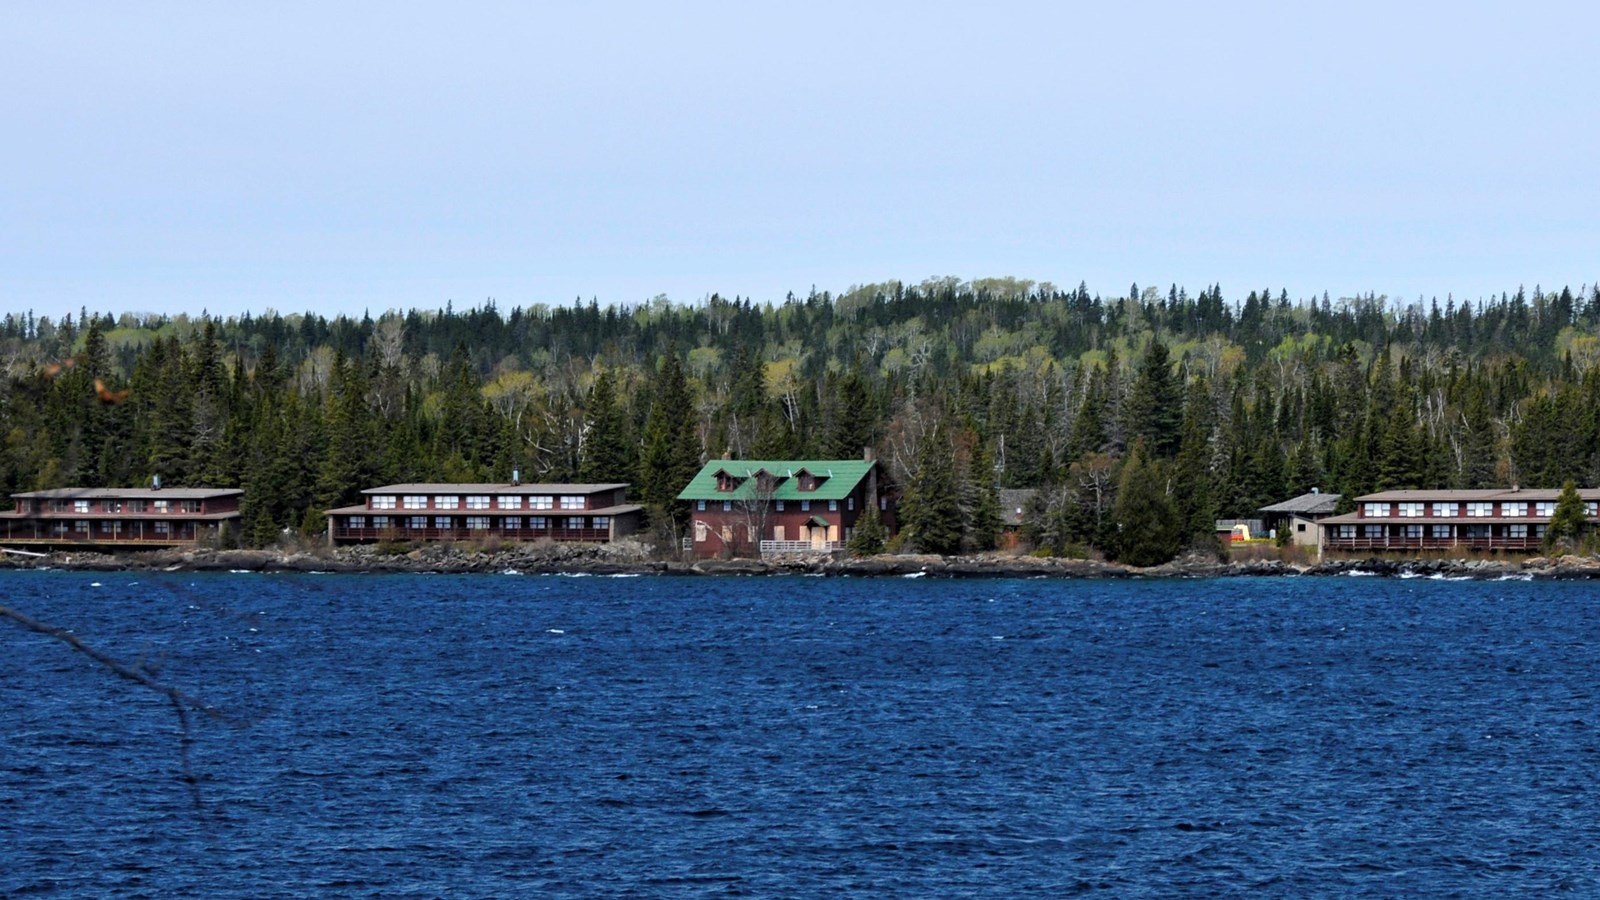 Buildings a part of the Rock Harbor Lodge sit on the shore of Lake Superior with a forest in back.